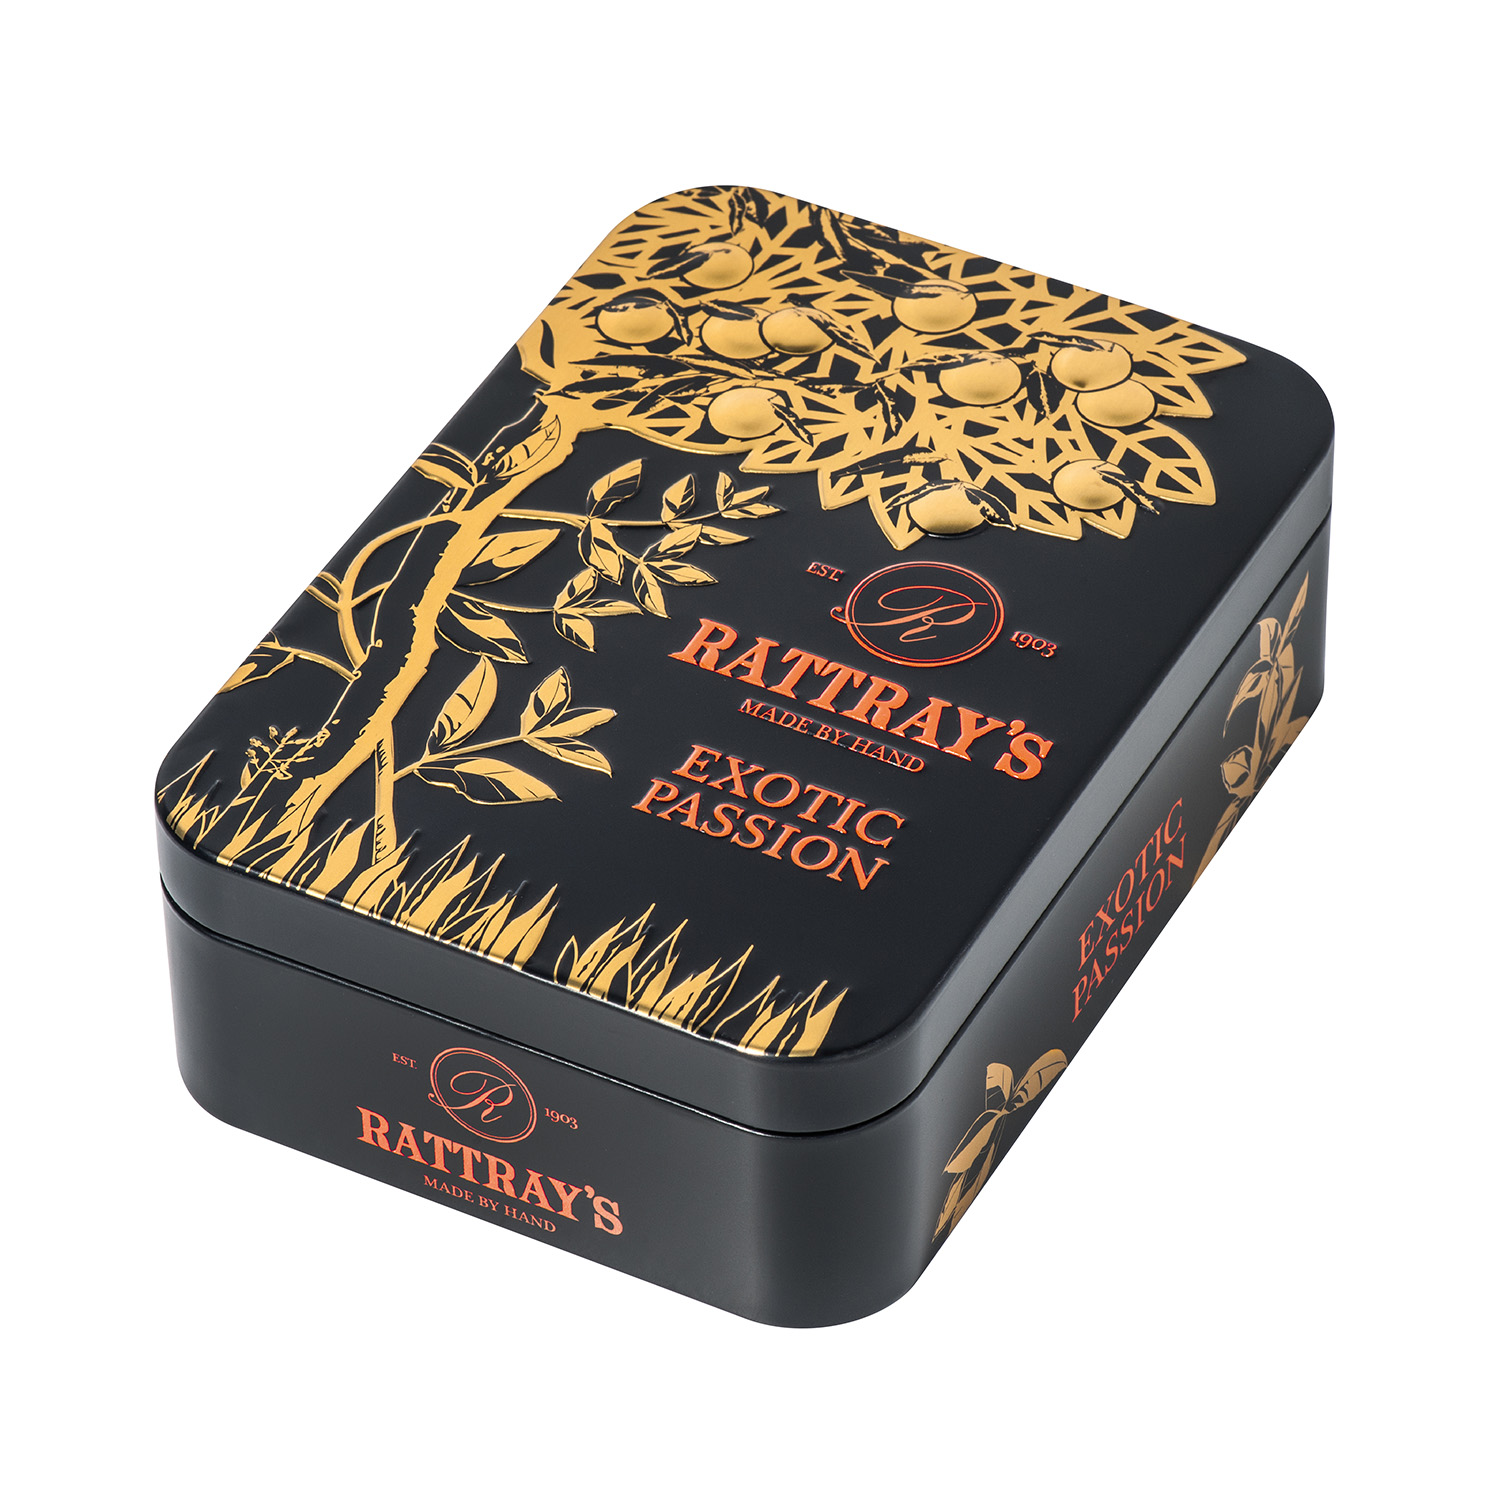 Rattray’s Exotic Passion 100g